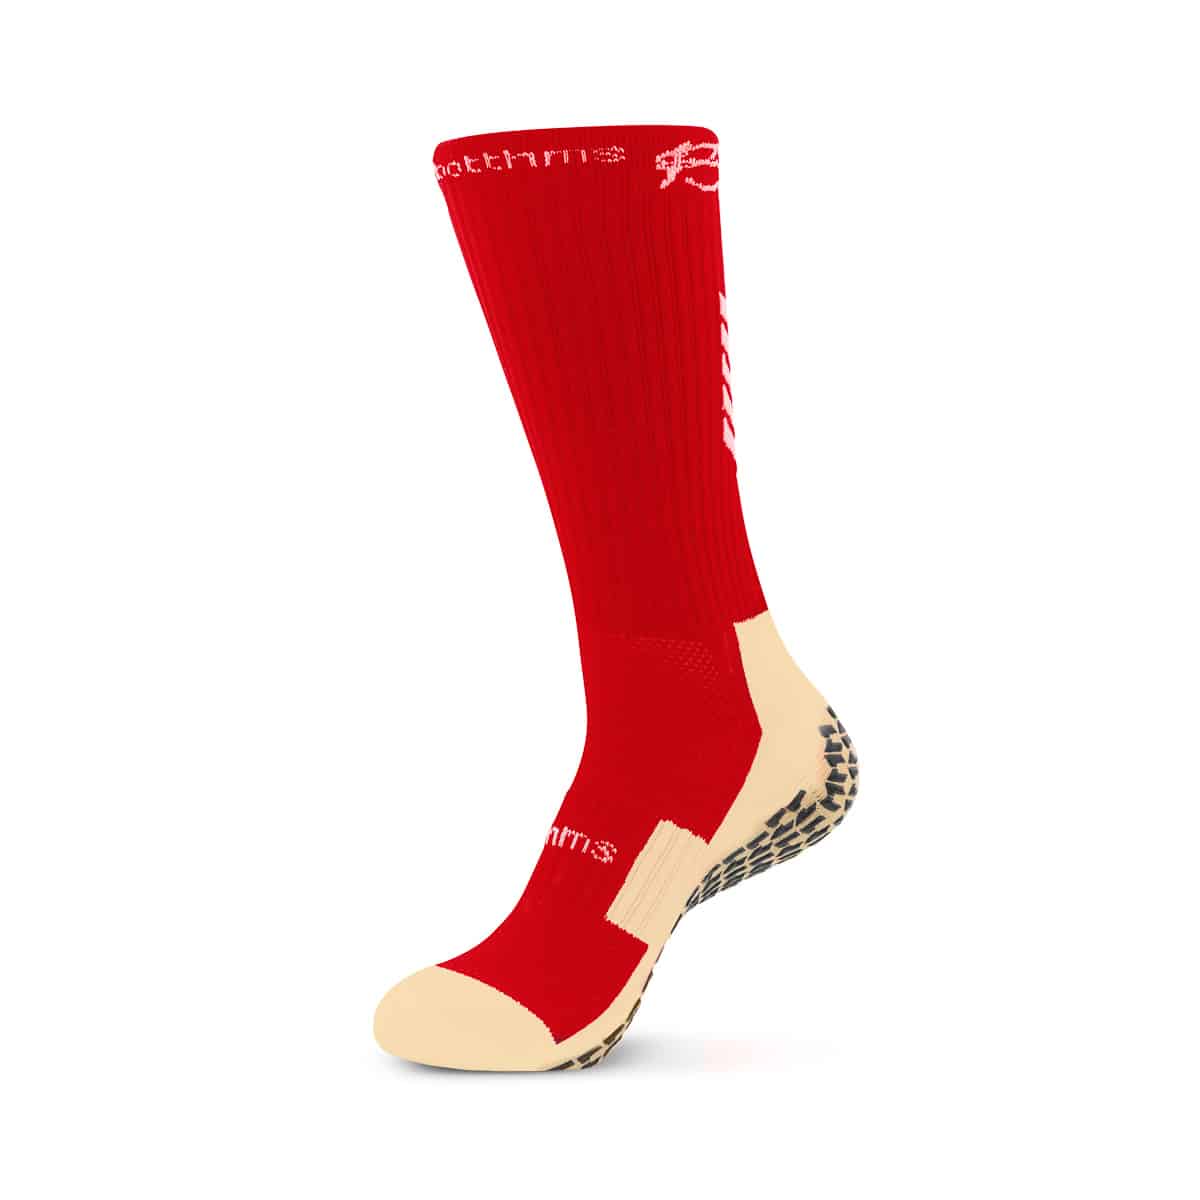 products/BOTTHMS_GRIP_SOCK_RED_3069.jpgproducts/BOTTHMS_GRIP_SOCK_RED_3062.jpgproducts/BOTTHMS_GRIP_SOCK_RED_3070.jpgproducts/BOTTHMS_GRIP_SOCK_RED_3069_Detail.jpgproducts/BOTTHMS_GRIP_SOCK_RED_3062_Detail.jpg